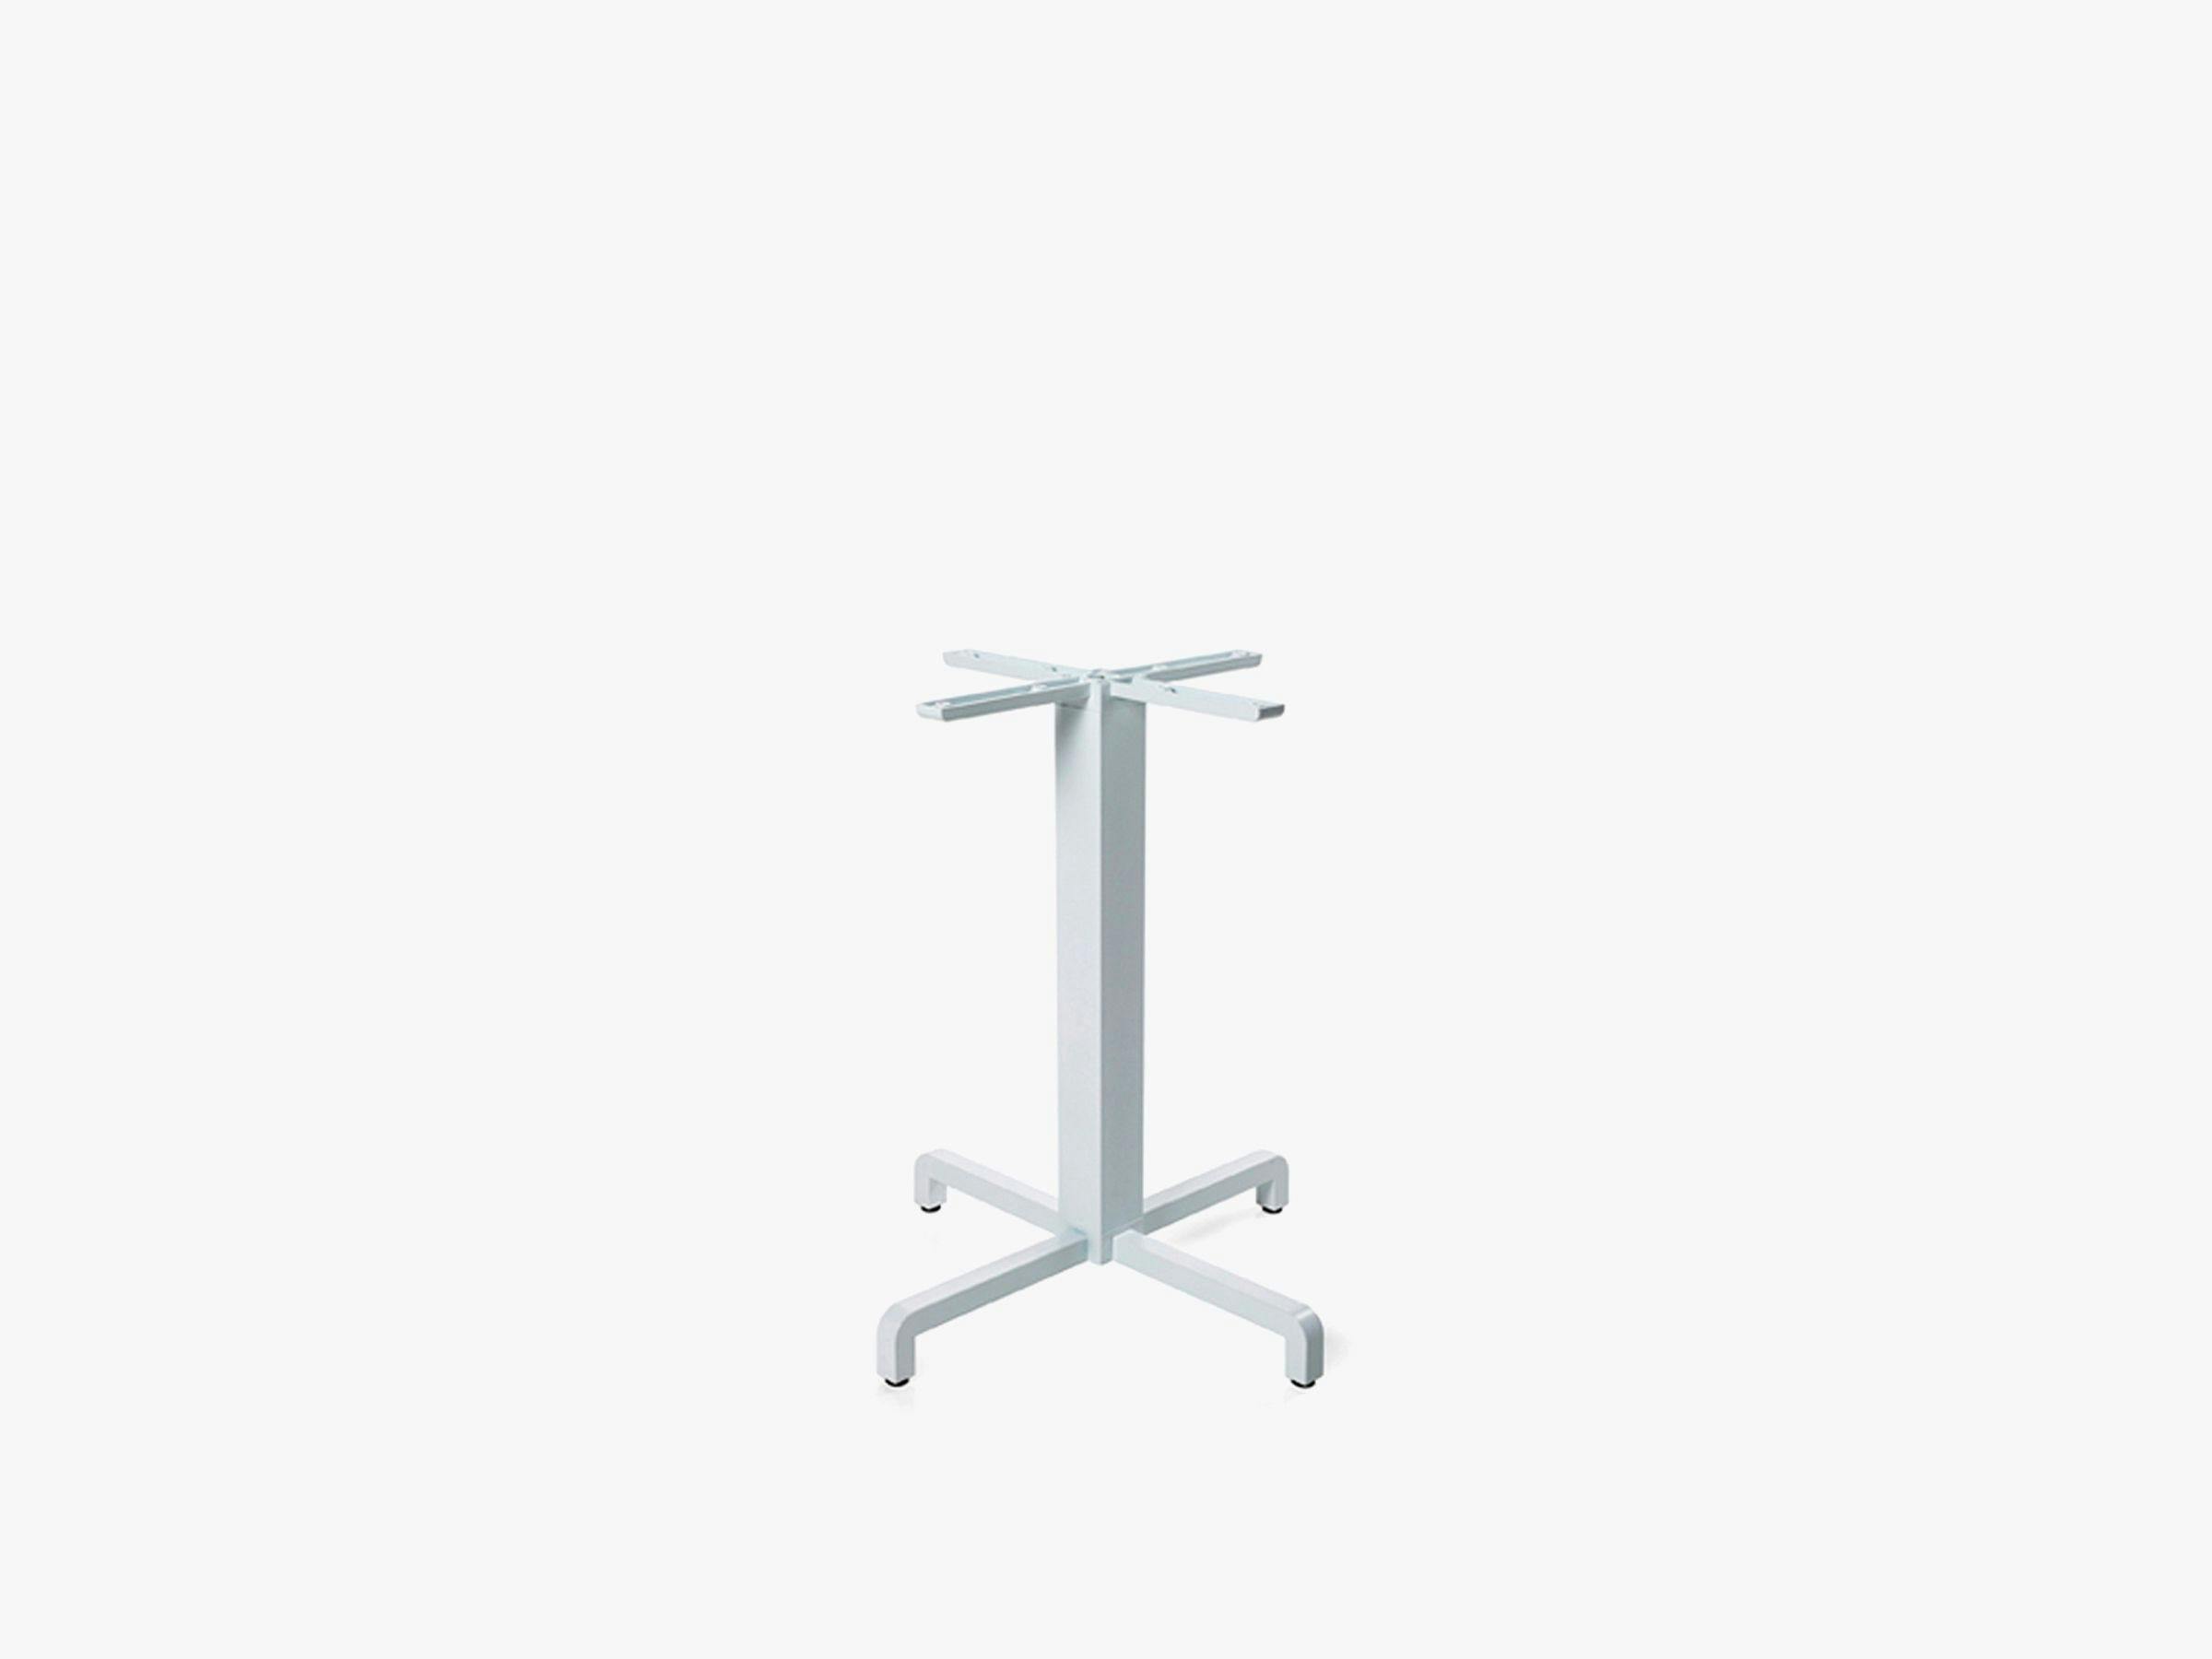 Euro Form Fiore Dining Tables Base, White